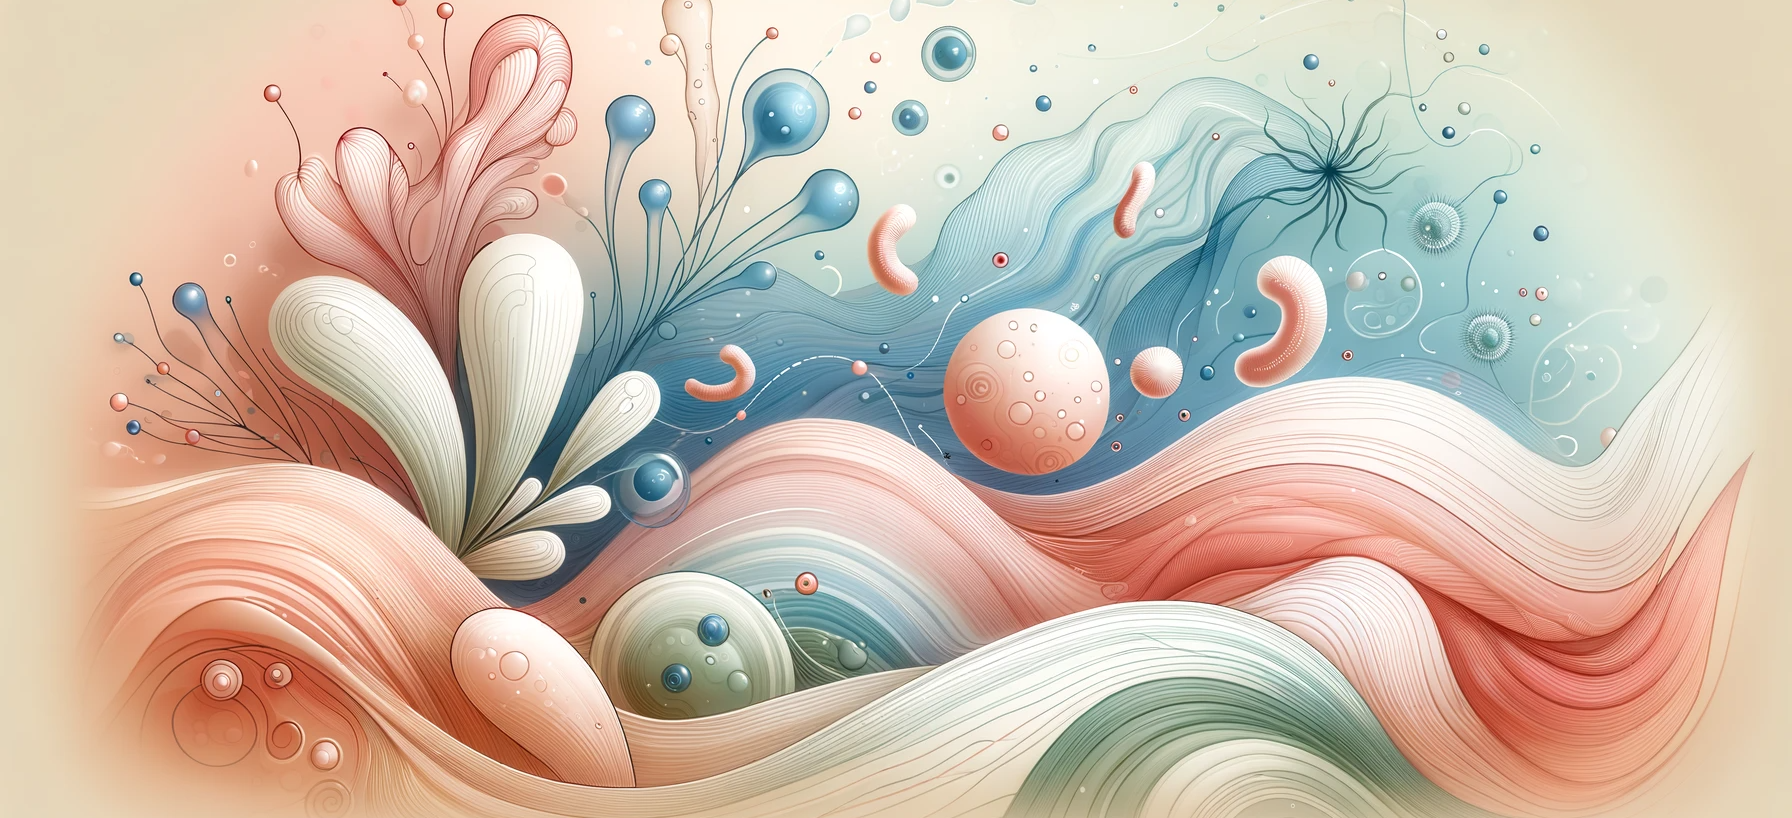 Abstract, soothing illustration for a skincare article, showcasing a balanced skin microbiome with soft pastel colors and flowing lines, symbolizing a harmonious and healthy skin environment